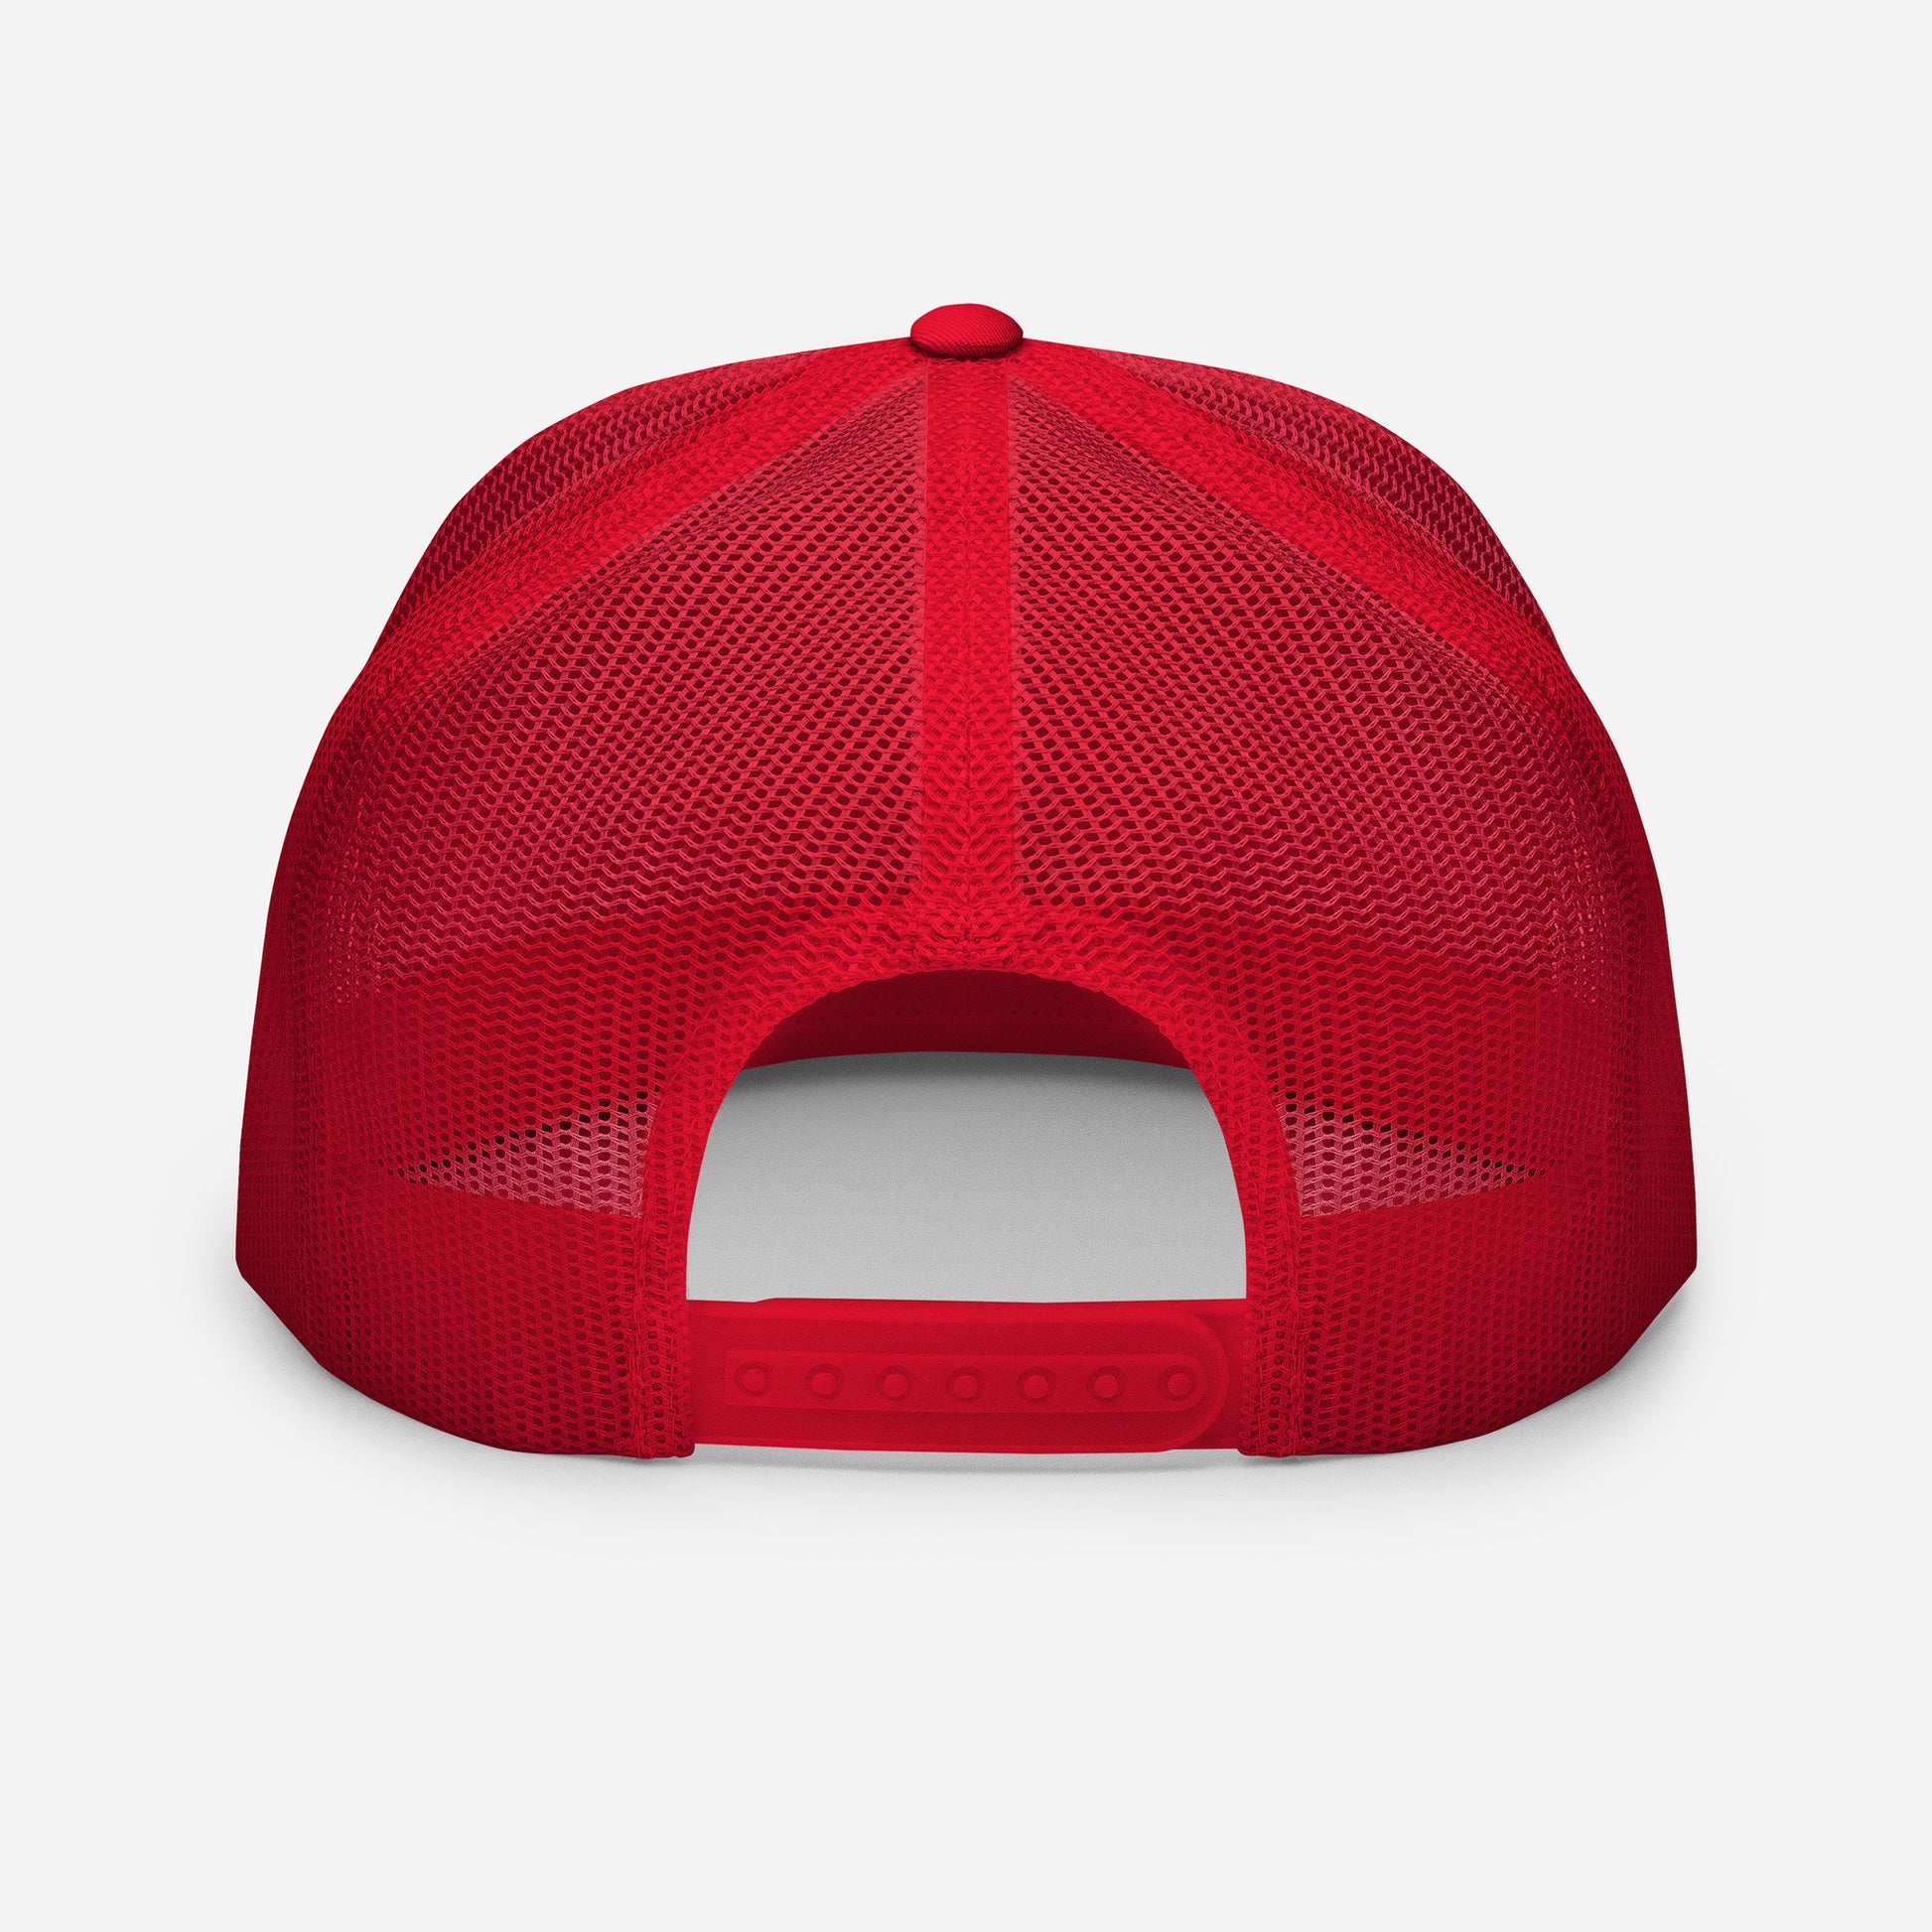 red snapback truckee hat